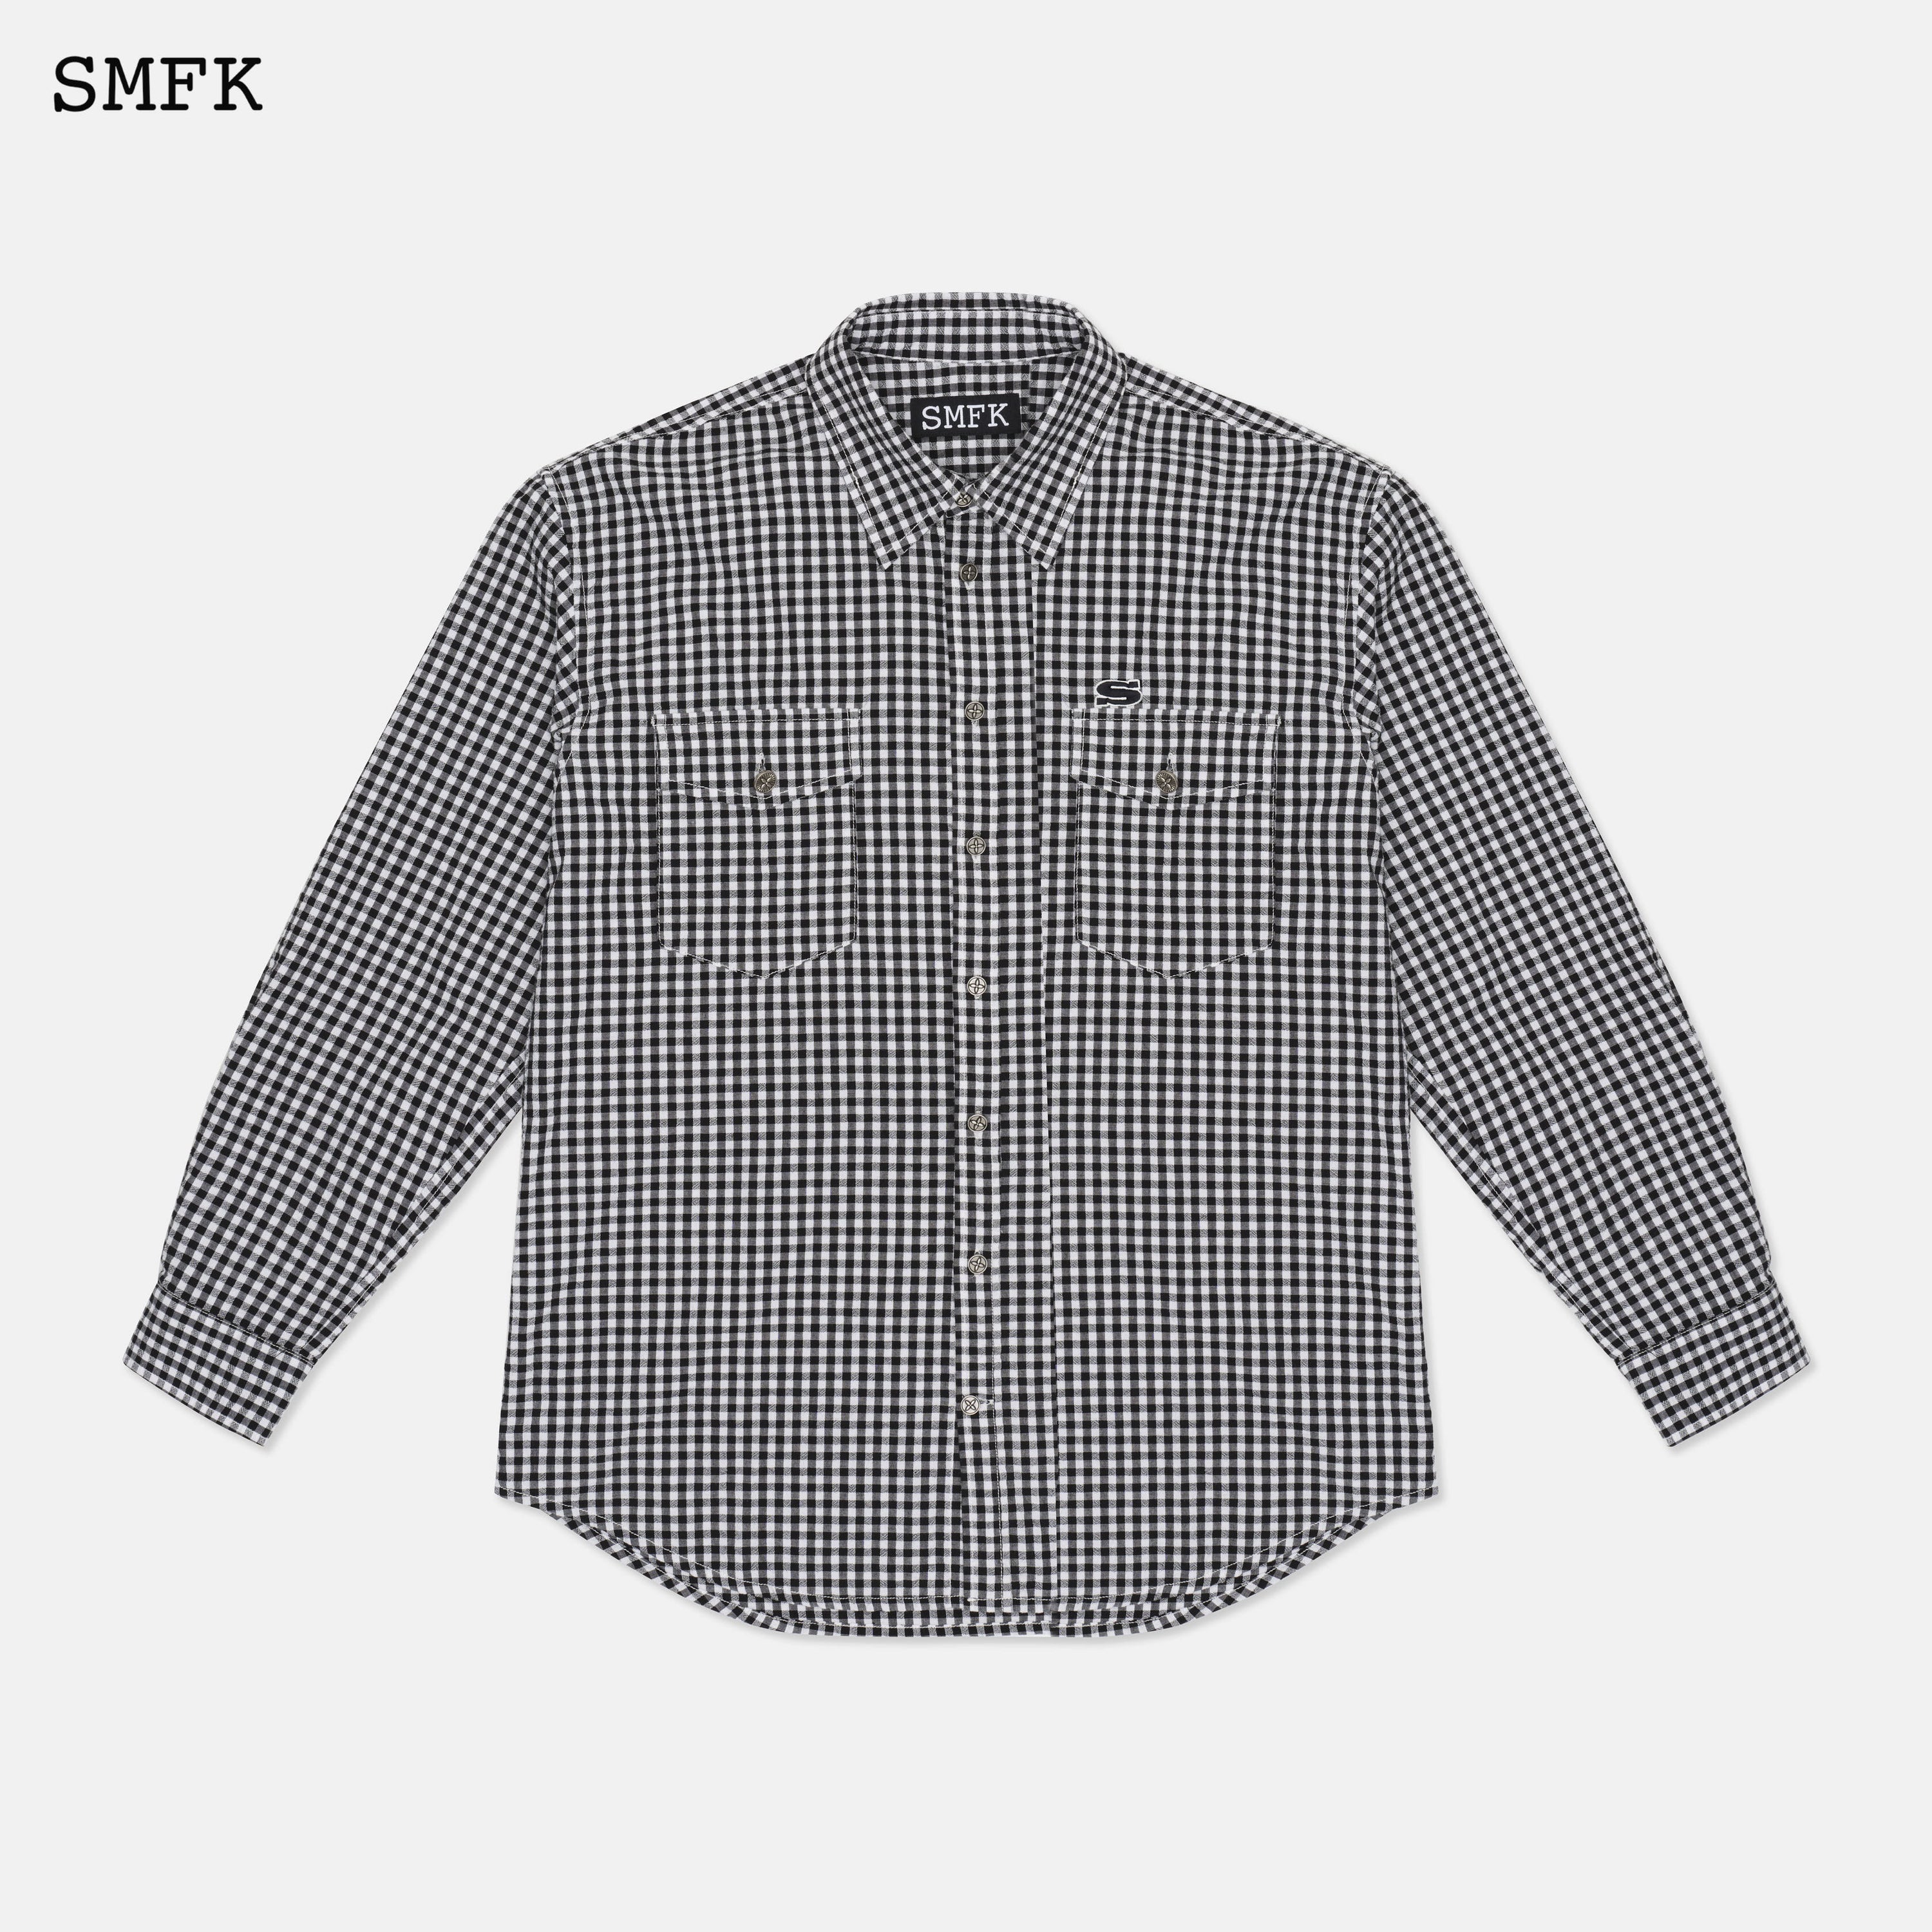 Vintage Academy Black And White Checkered Shirt - SMFK Official